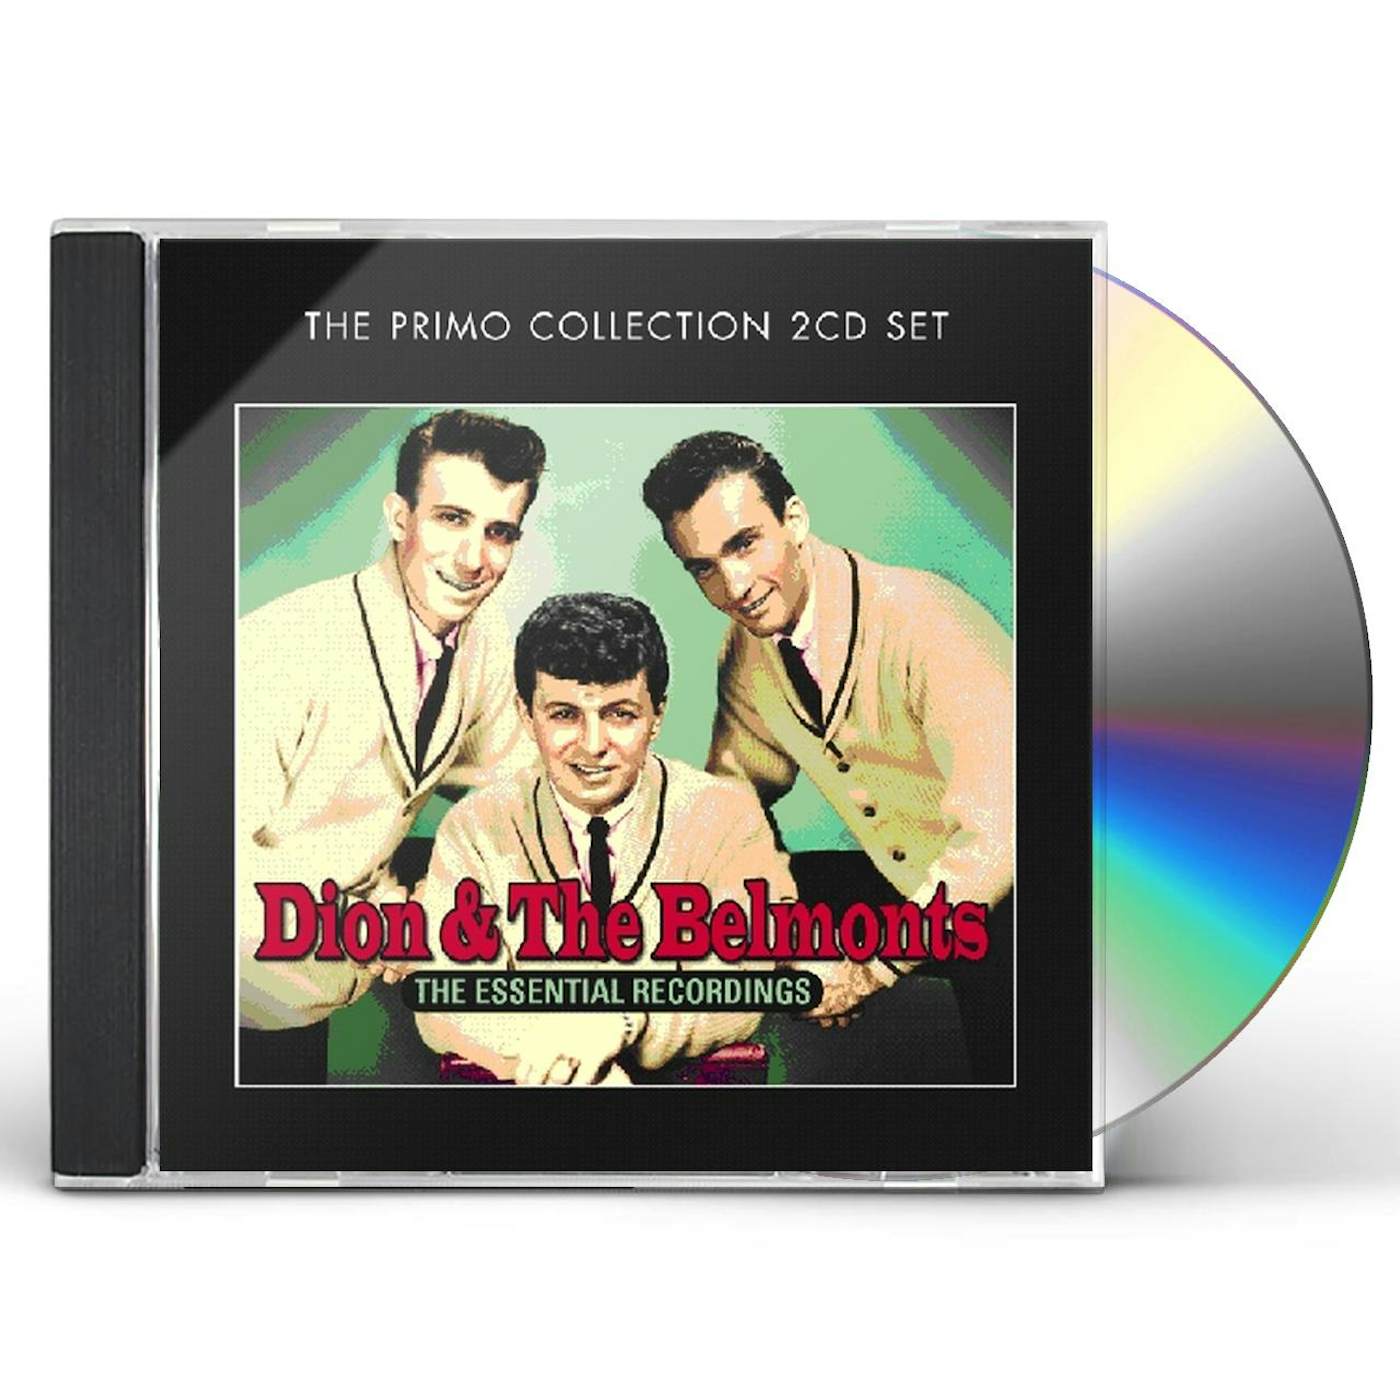 Dion & The Belmonts ESSENTIAL RECORDINGS CD